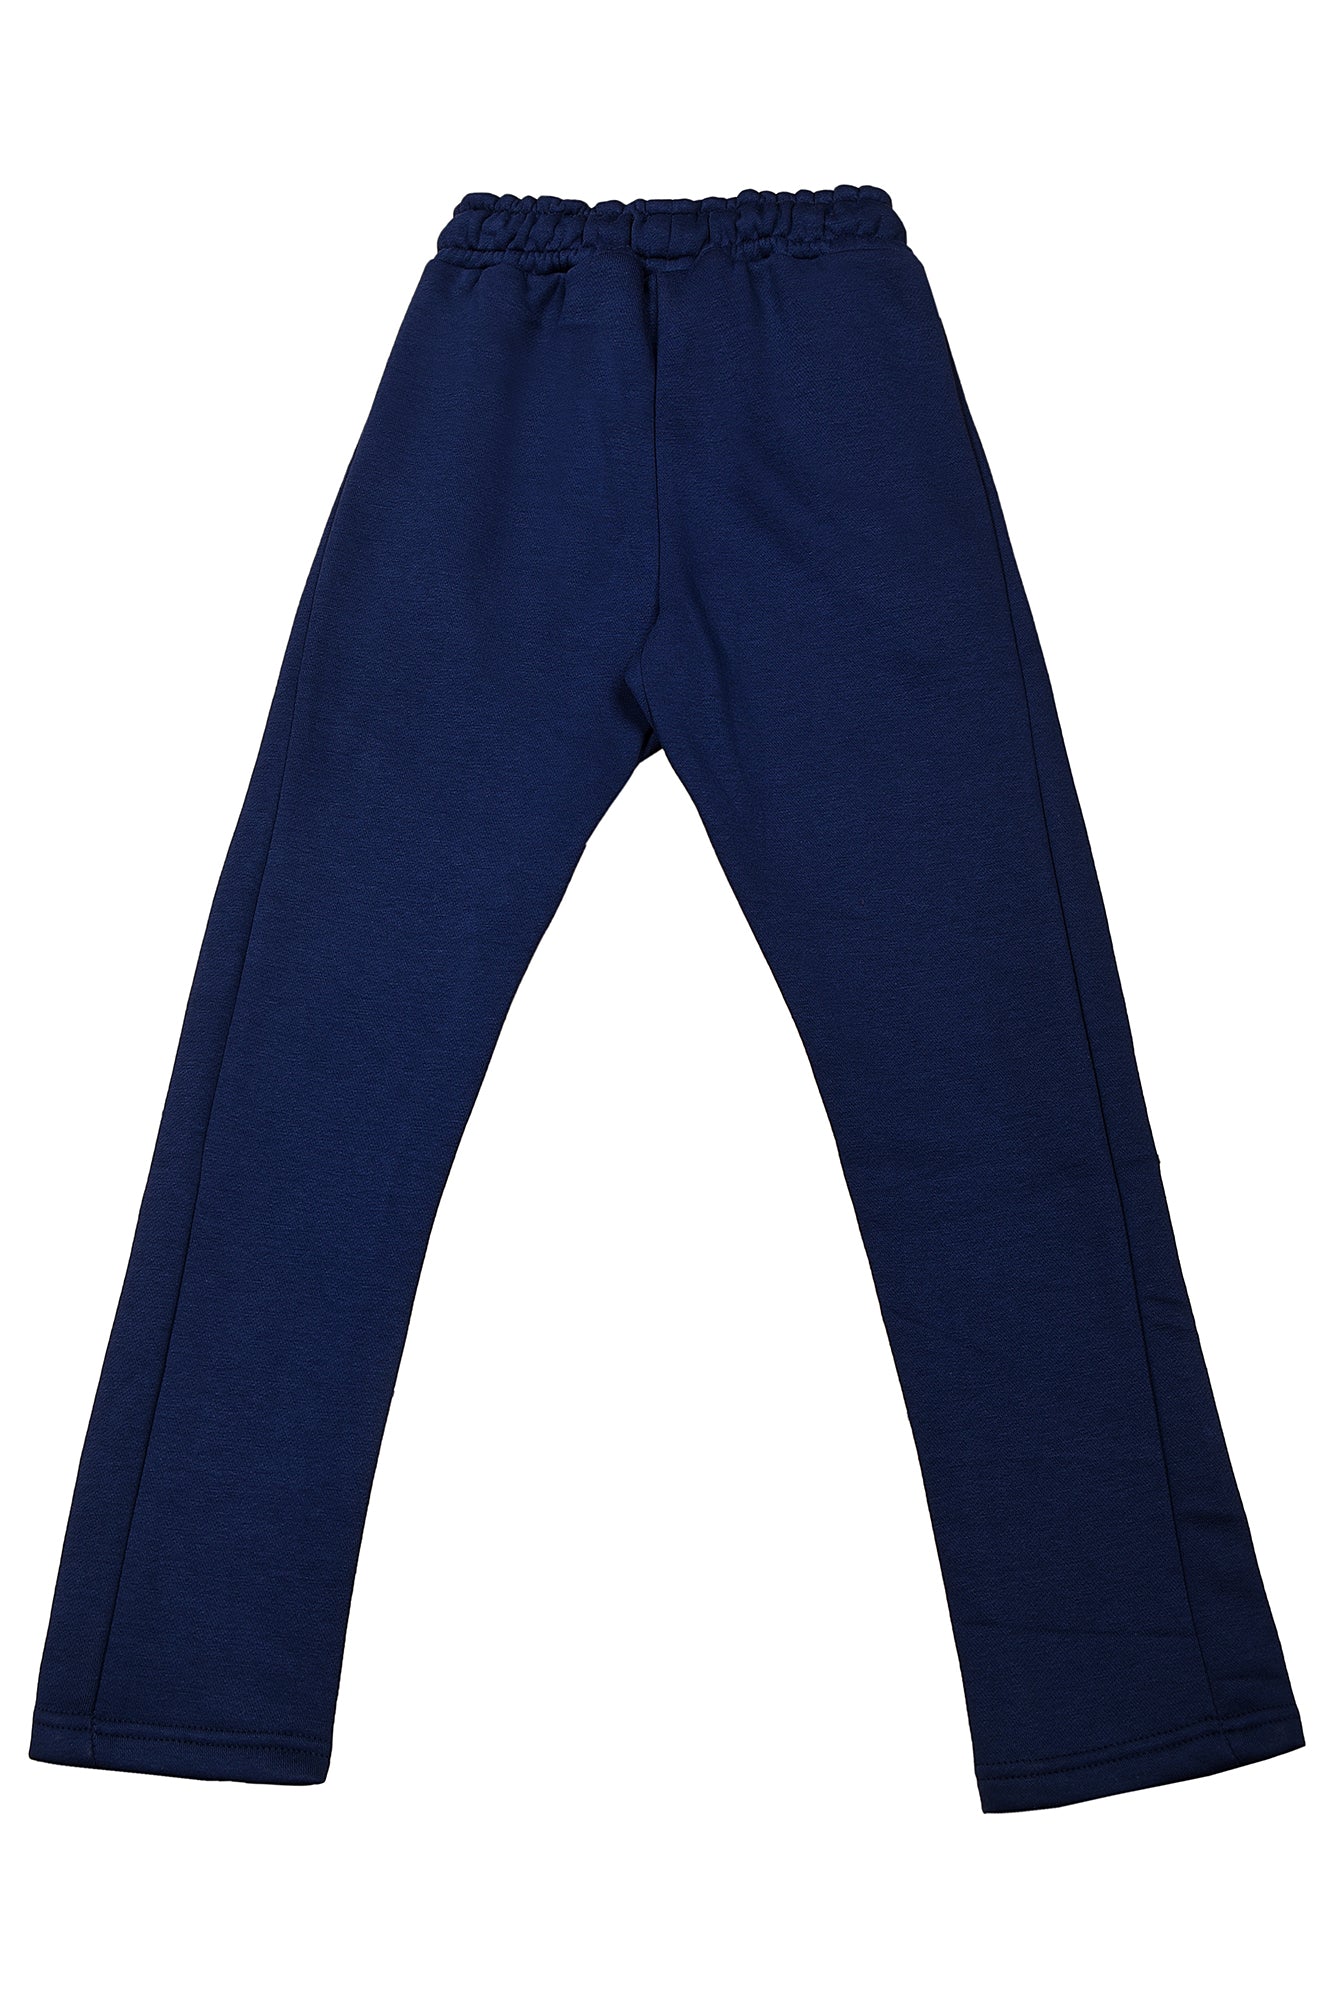 KDS-BC-13150 PULL ON TROUSER NAVY/BLUE